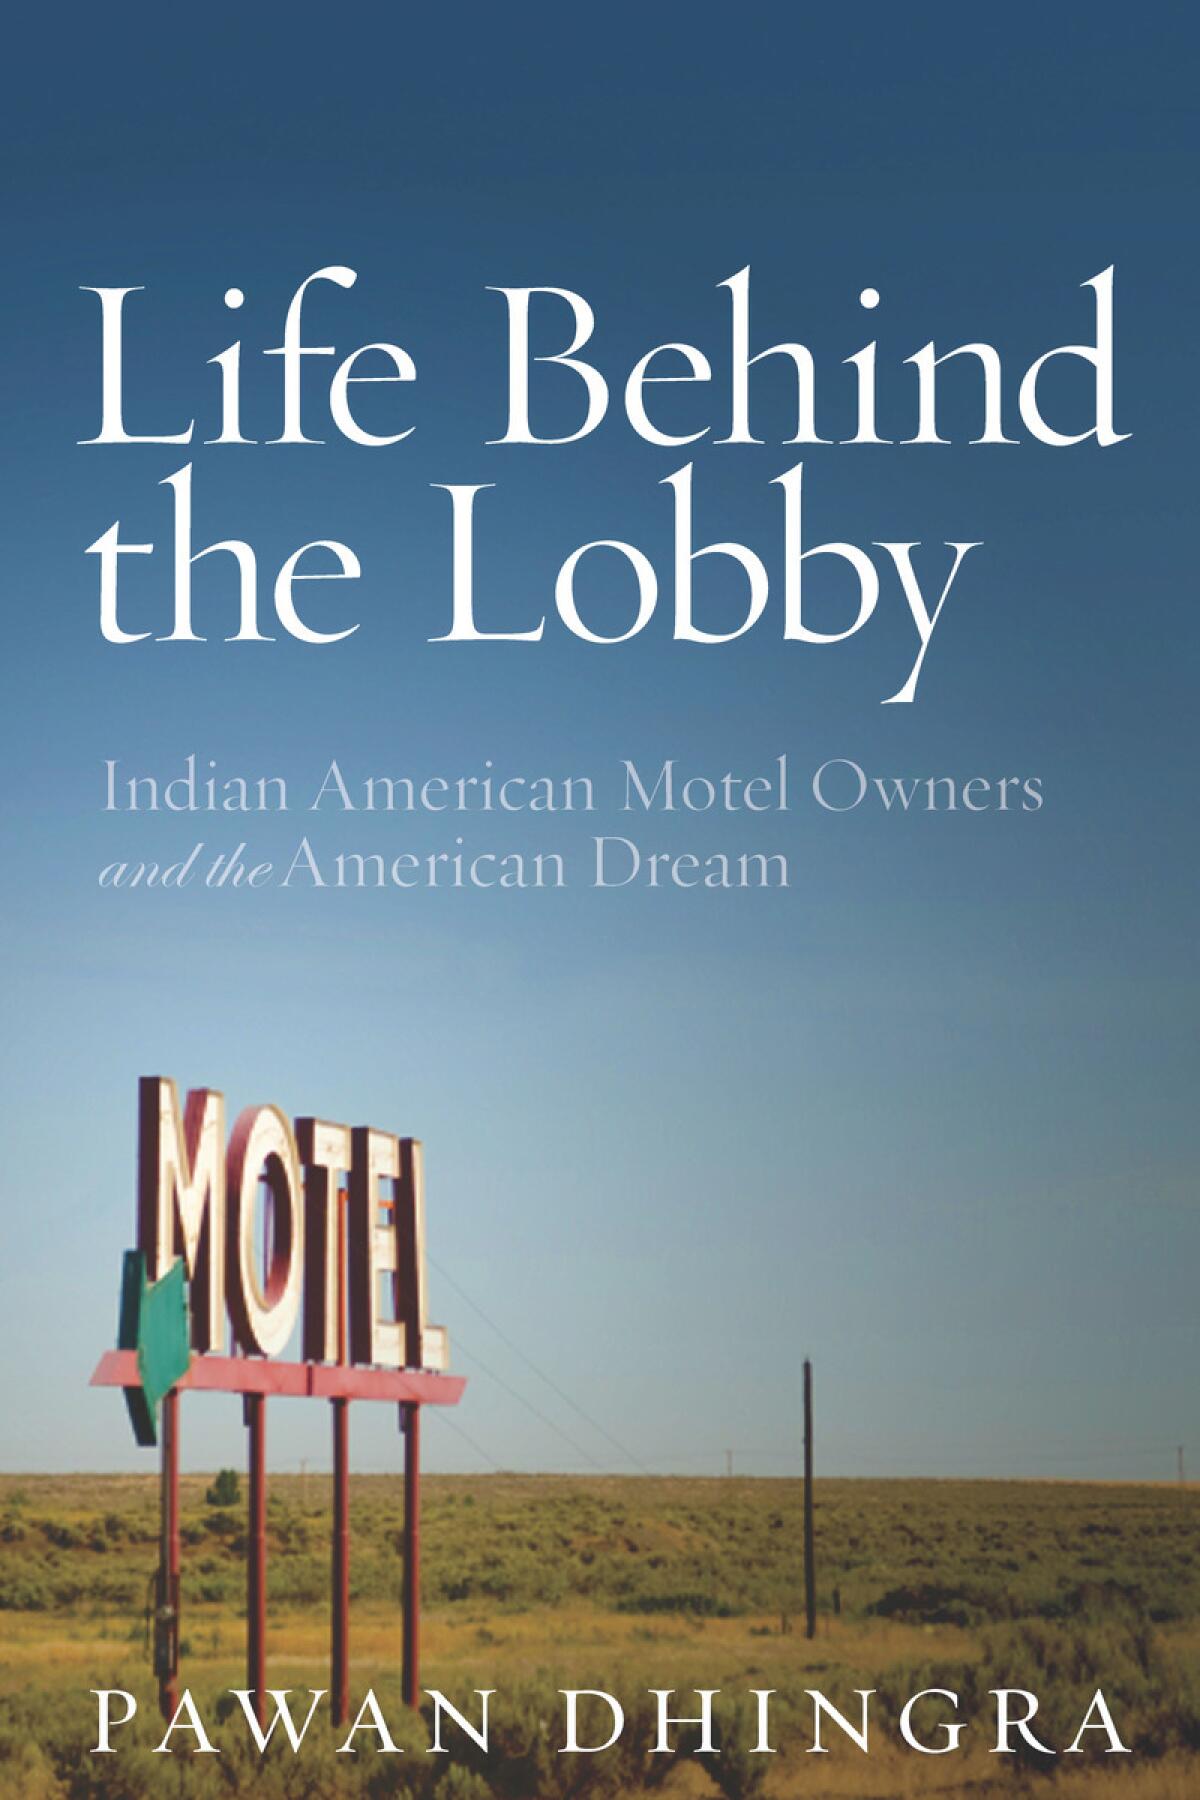 Book jacket for "Life Behind the Lobby: Indian American Motel Owners and the American Dream" by Pawan Dhingra